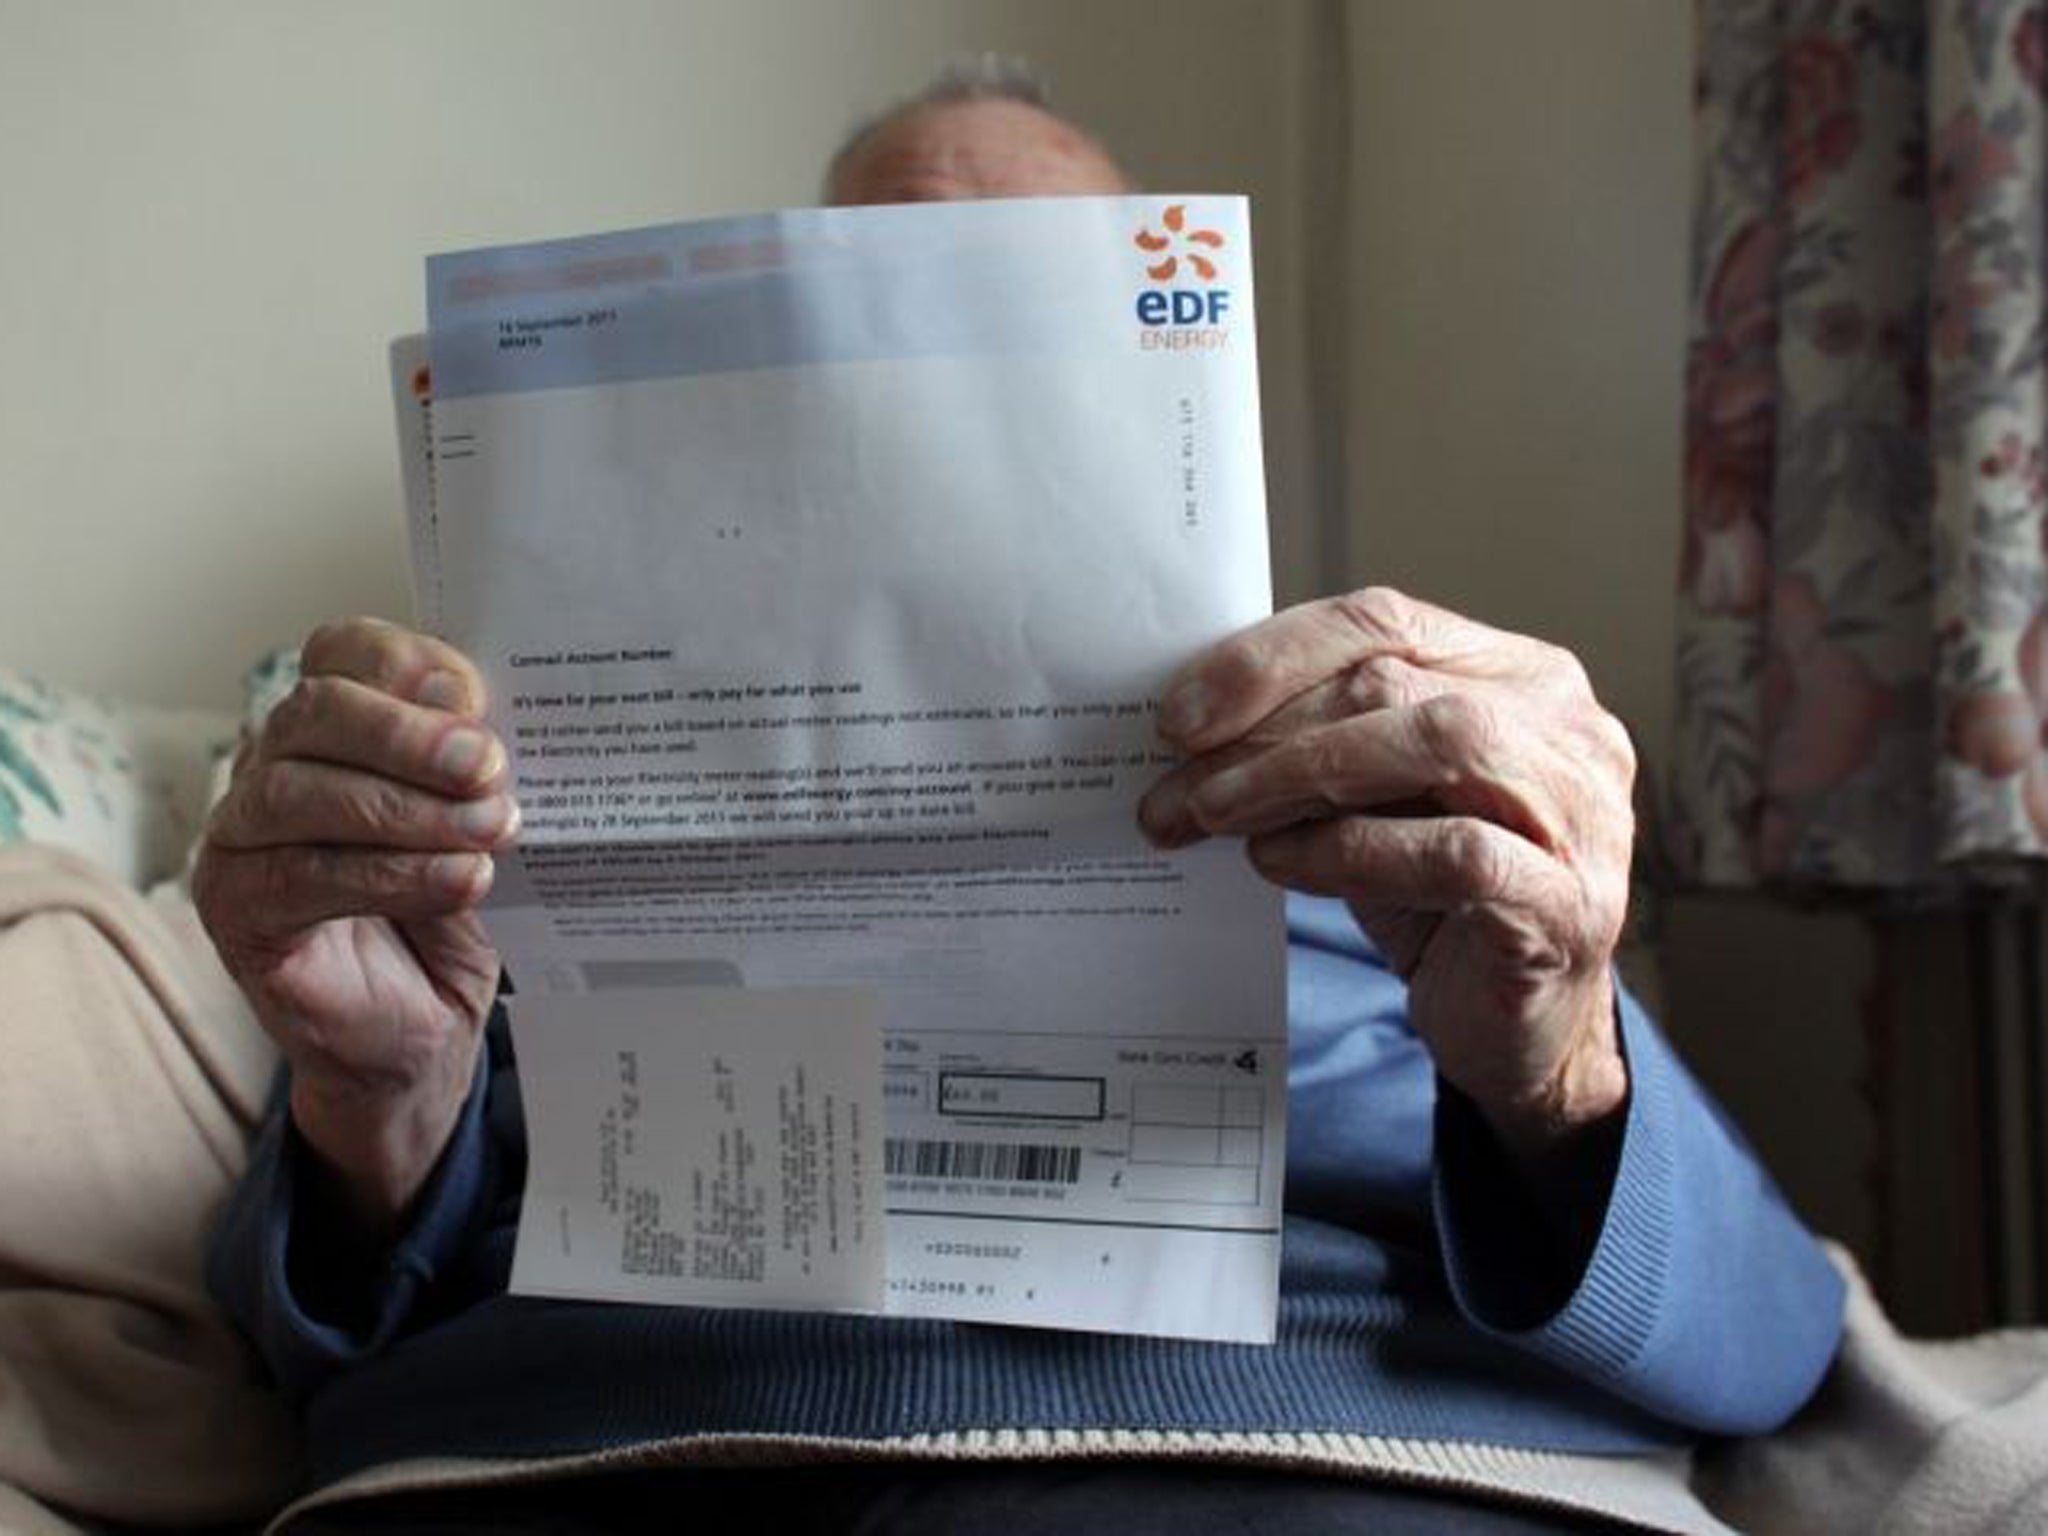 Older people on fixed incomes can struggle to meet the rising cost of their fuel bills